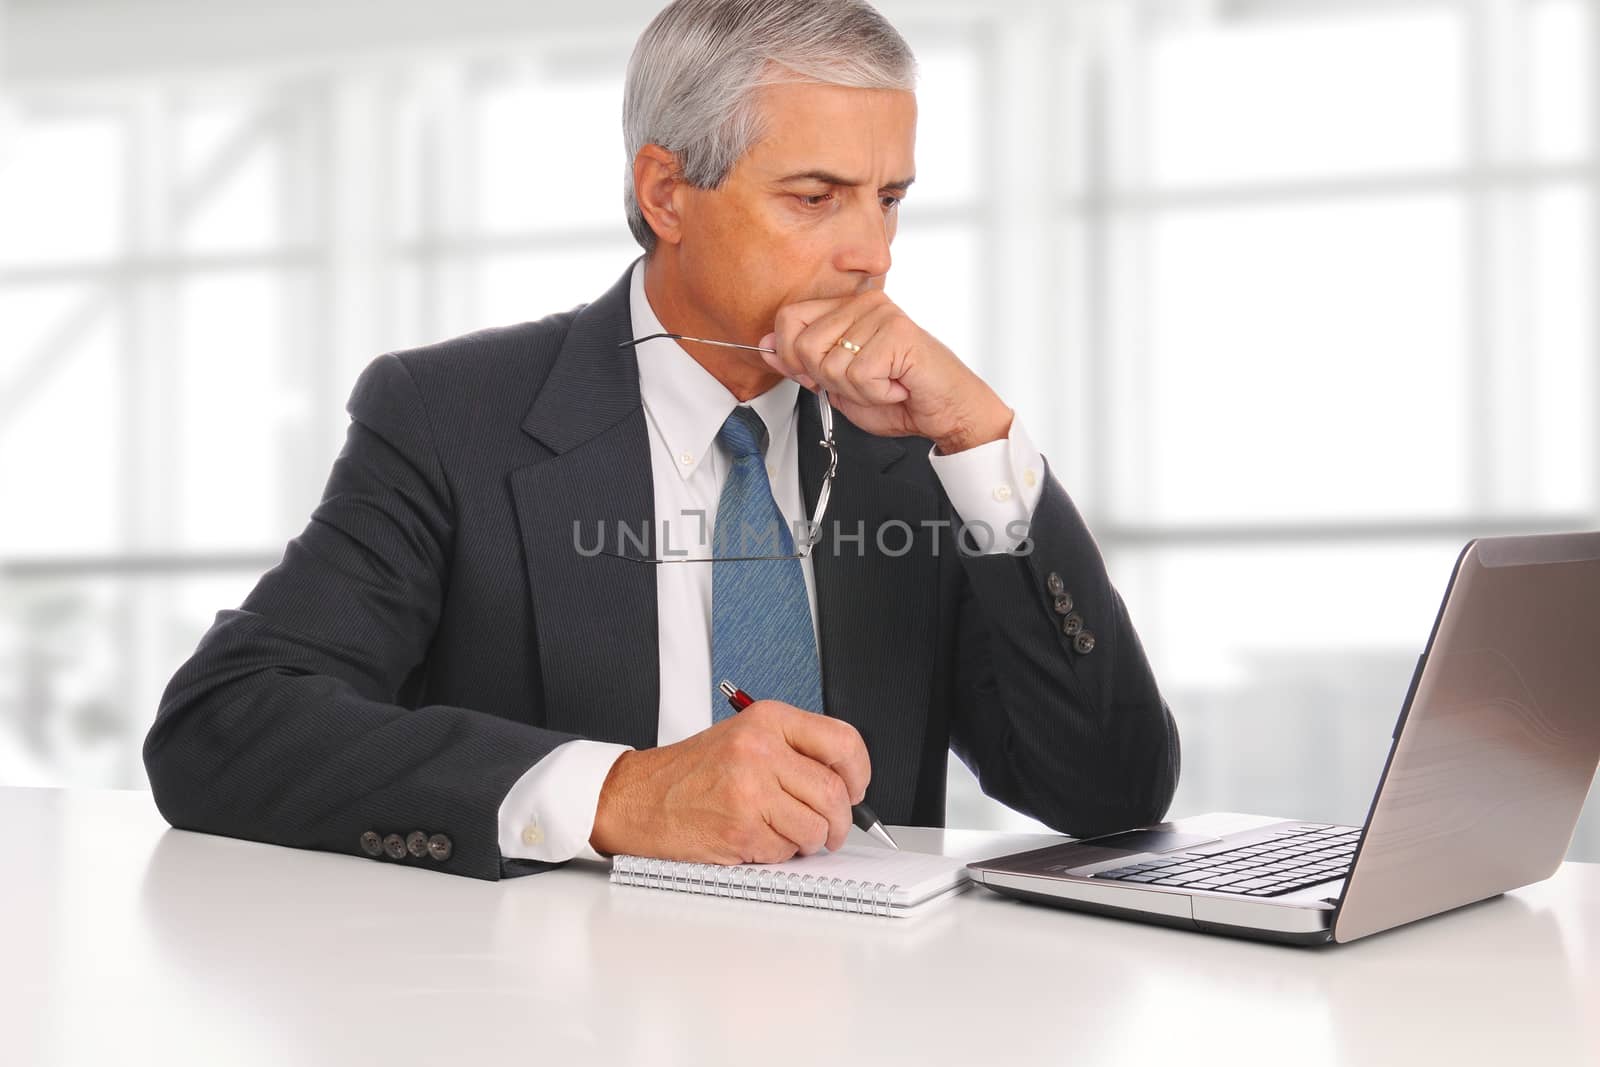 Mature businessman seated at his desk in a modern office building. In front of him is a laptop and note pad. The man is deep in thought.